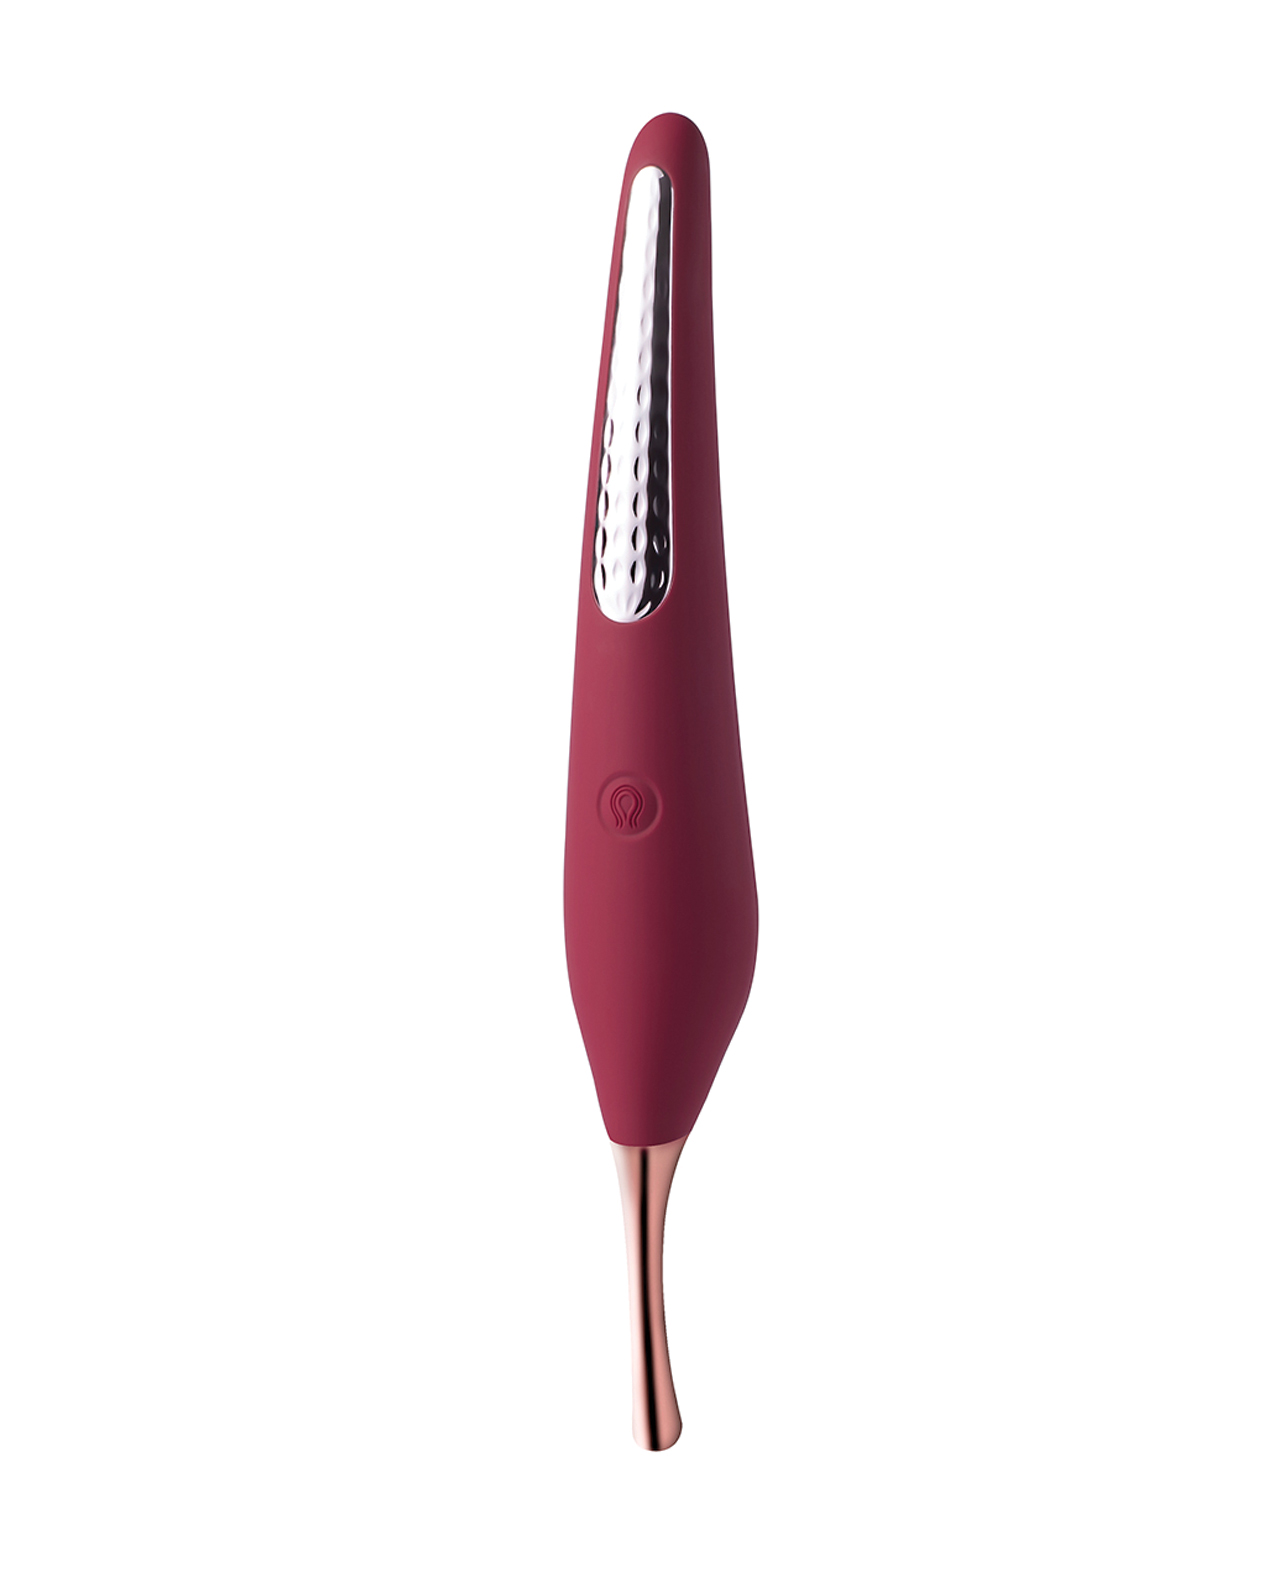 Ms. Honey Pinpoint Clit Vibrator & Nipple Stimulator in Red Wine